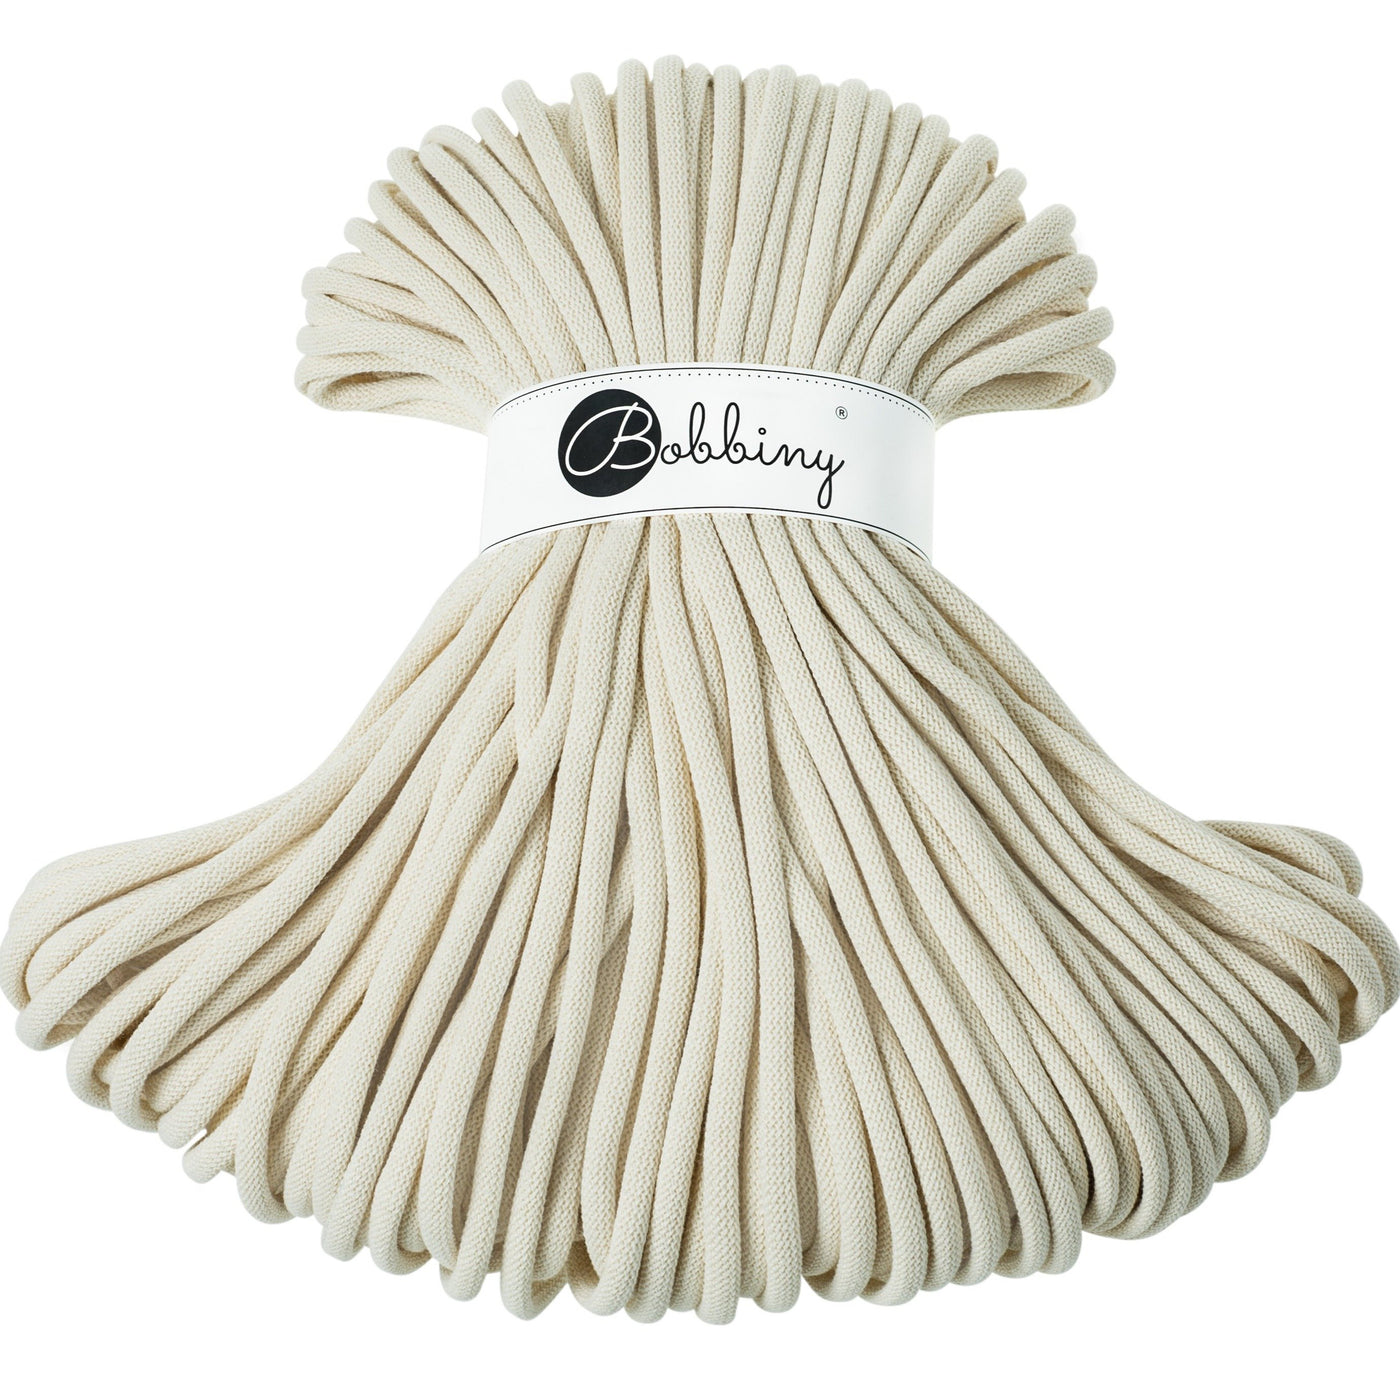 Where can I find Bobbiny Braided Cords Bobbiny Jumbo 9mm - 100m Ecru? These gorgeous Bobbiny Ropes are made in Poland from 100% recycled cottons and are non toxic and certified safe for children. 9mm Diameter Length 100m Recommended for use with 14-16mm crochet hooks or knitting needles. Perfect for use with Macrame, Crochet or Knitting.